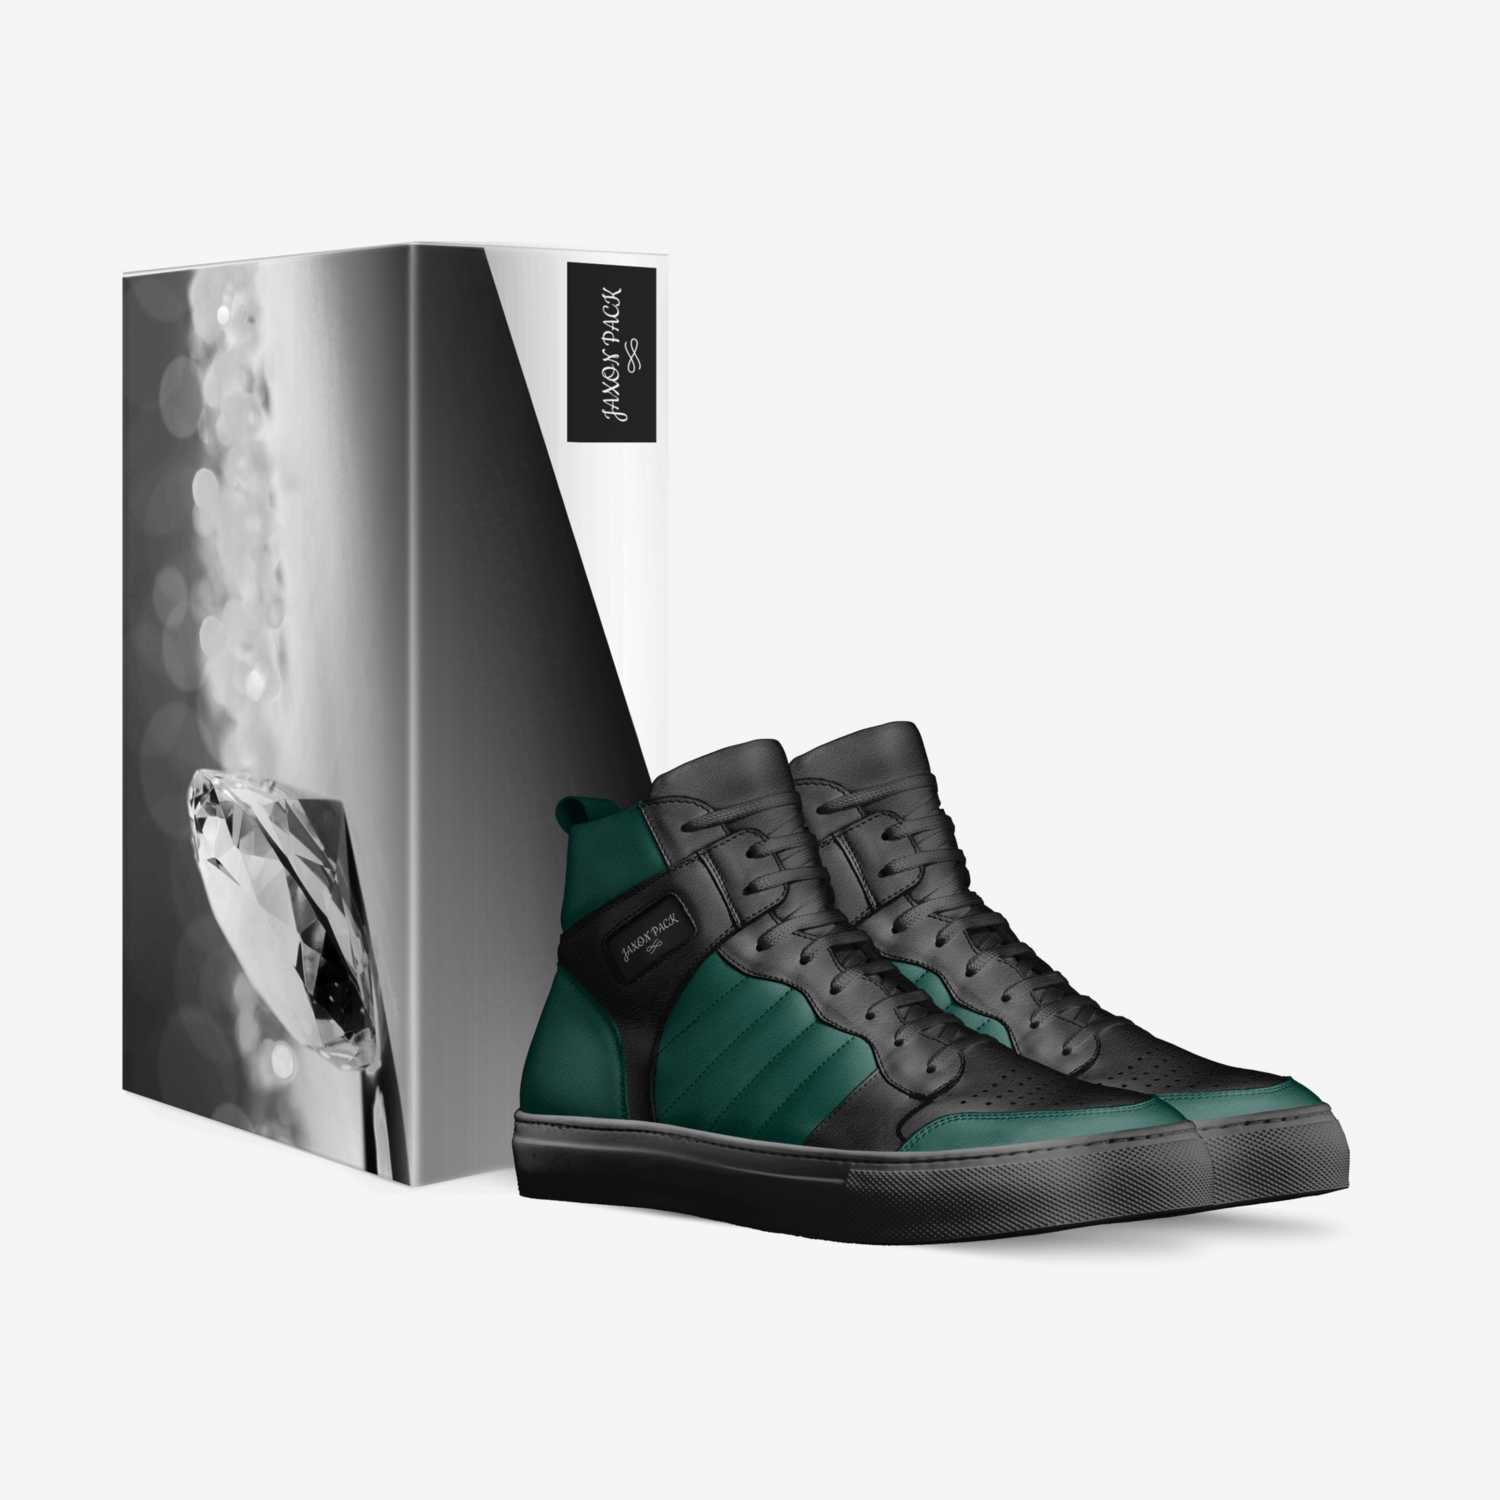 JAXON PACK custom made in Italy shoes by Jaxon Taylor Selby | Box view